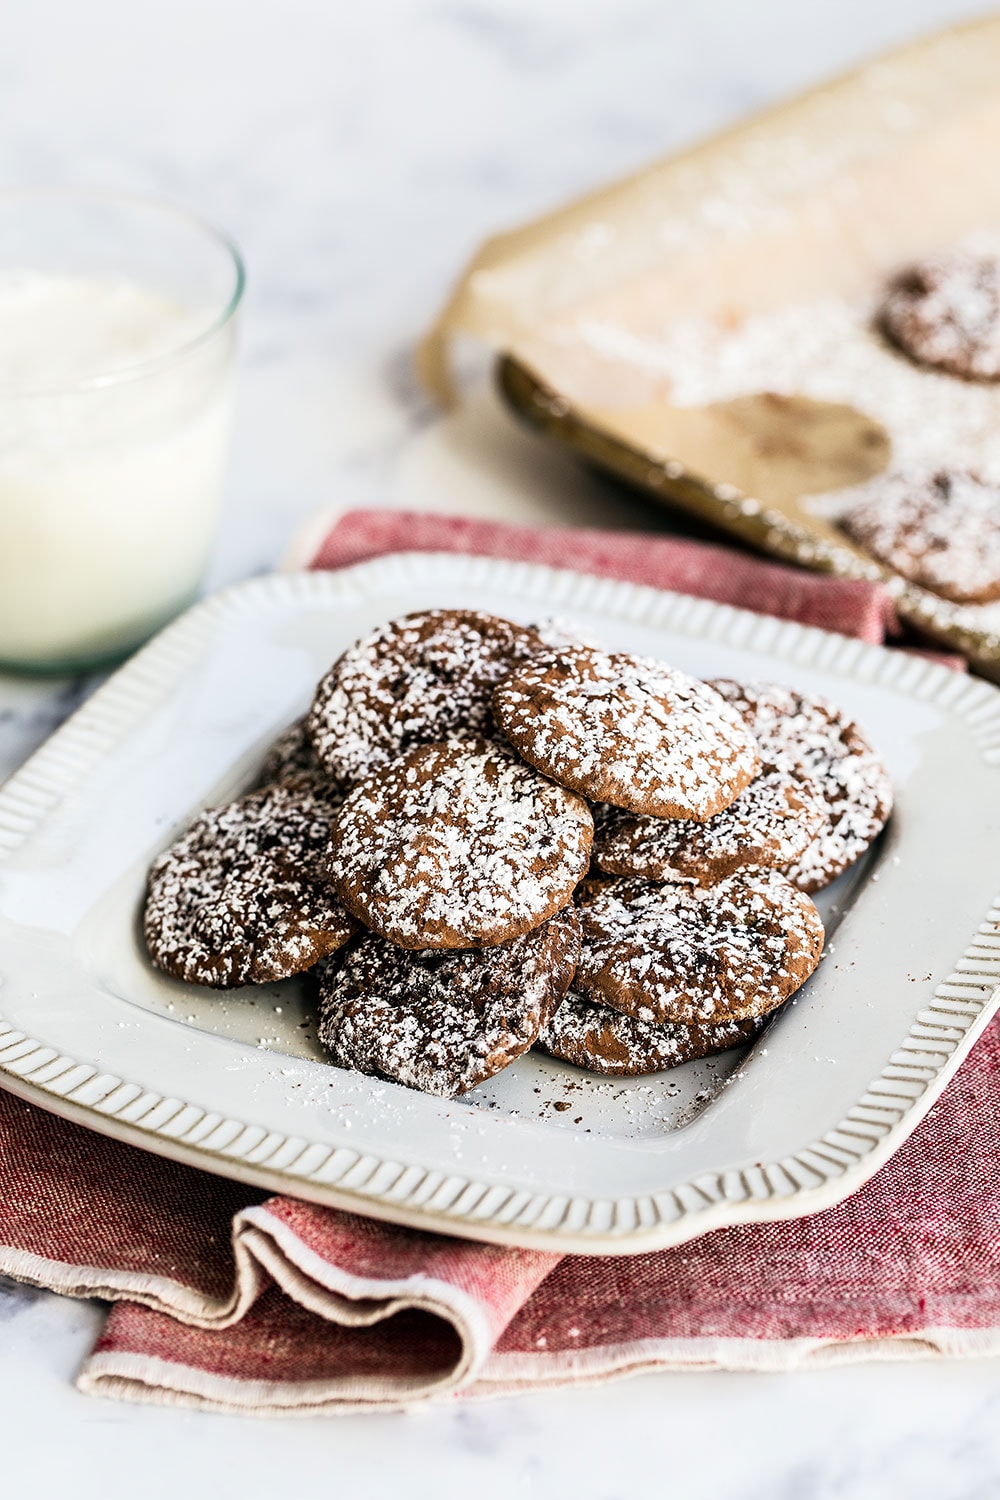 Mocha Cookies are bite-sized soft and chewy espresso chocolate chip cookies coated in cocoa powder and dusted with a snowfall of powdered sugar. A great Christmas cookie recipe!